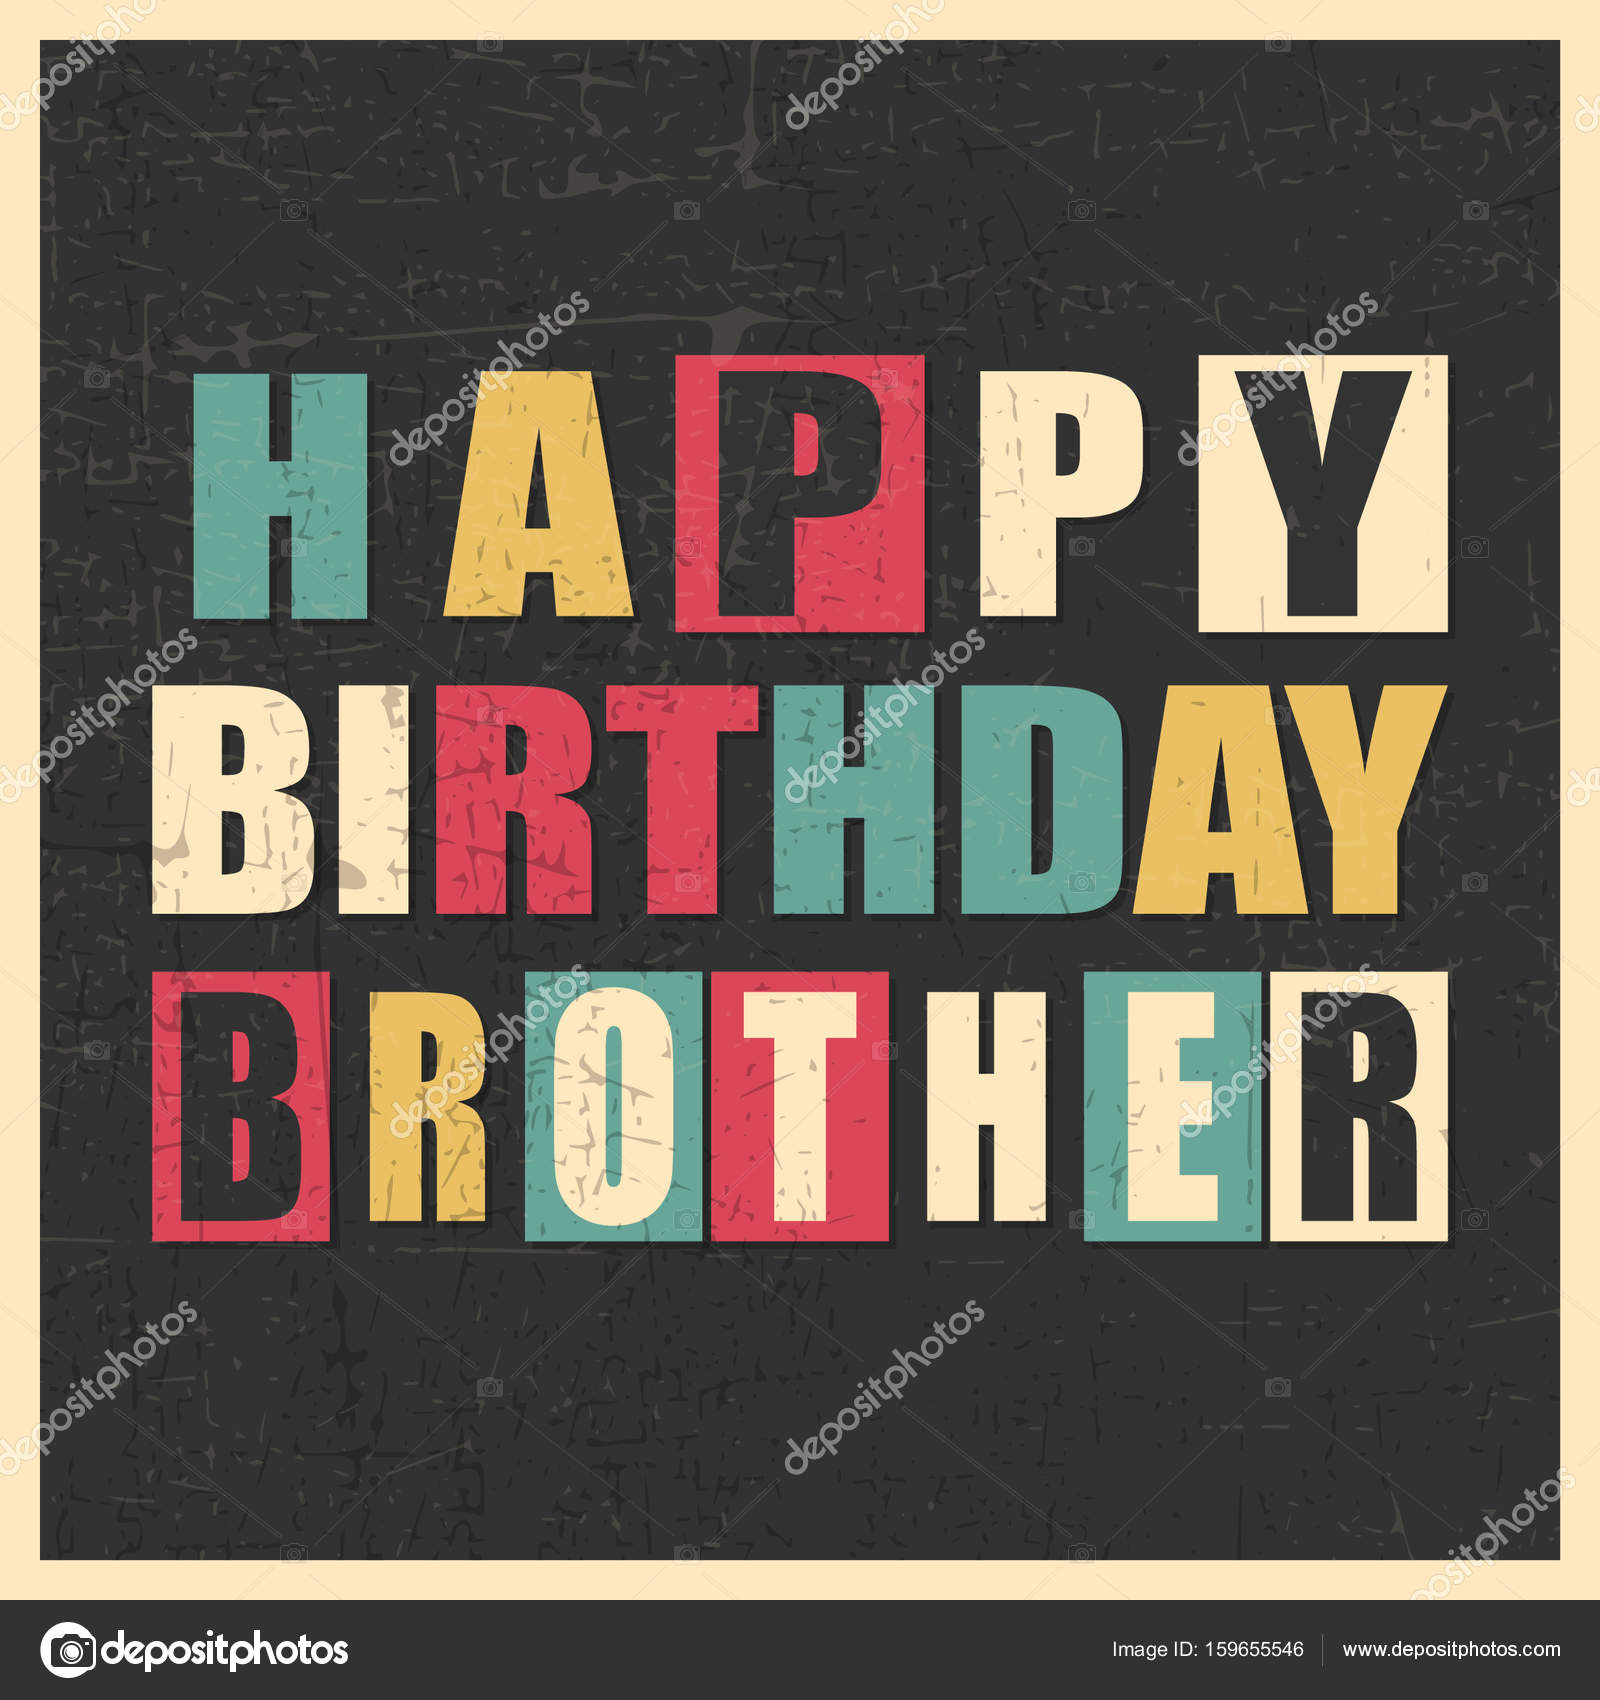 Happy birthday Brother on black background with grunge shapes in ...